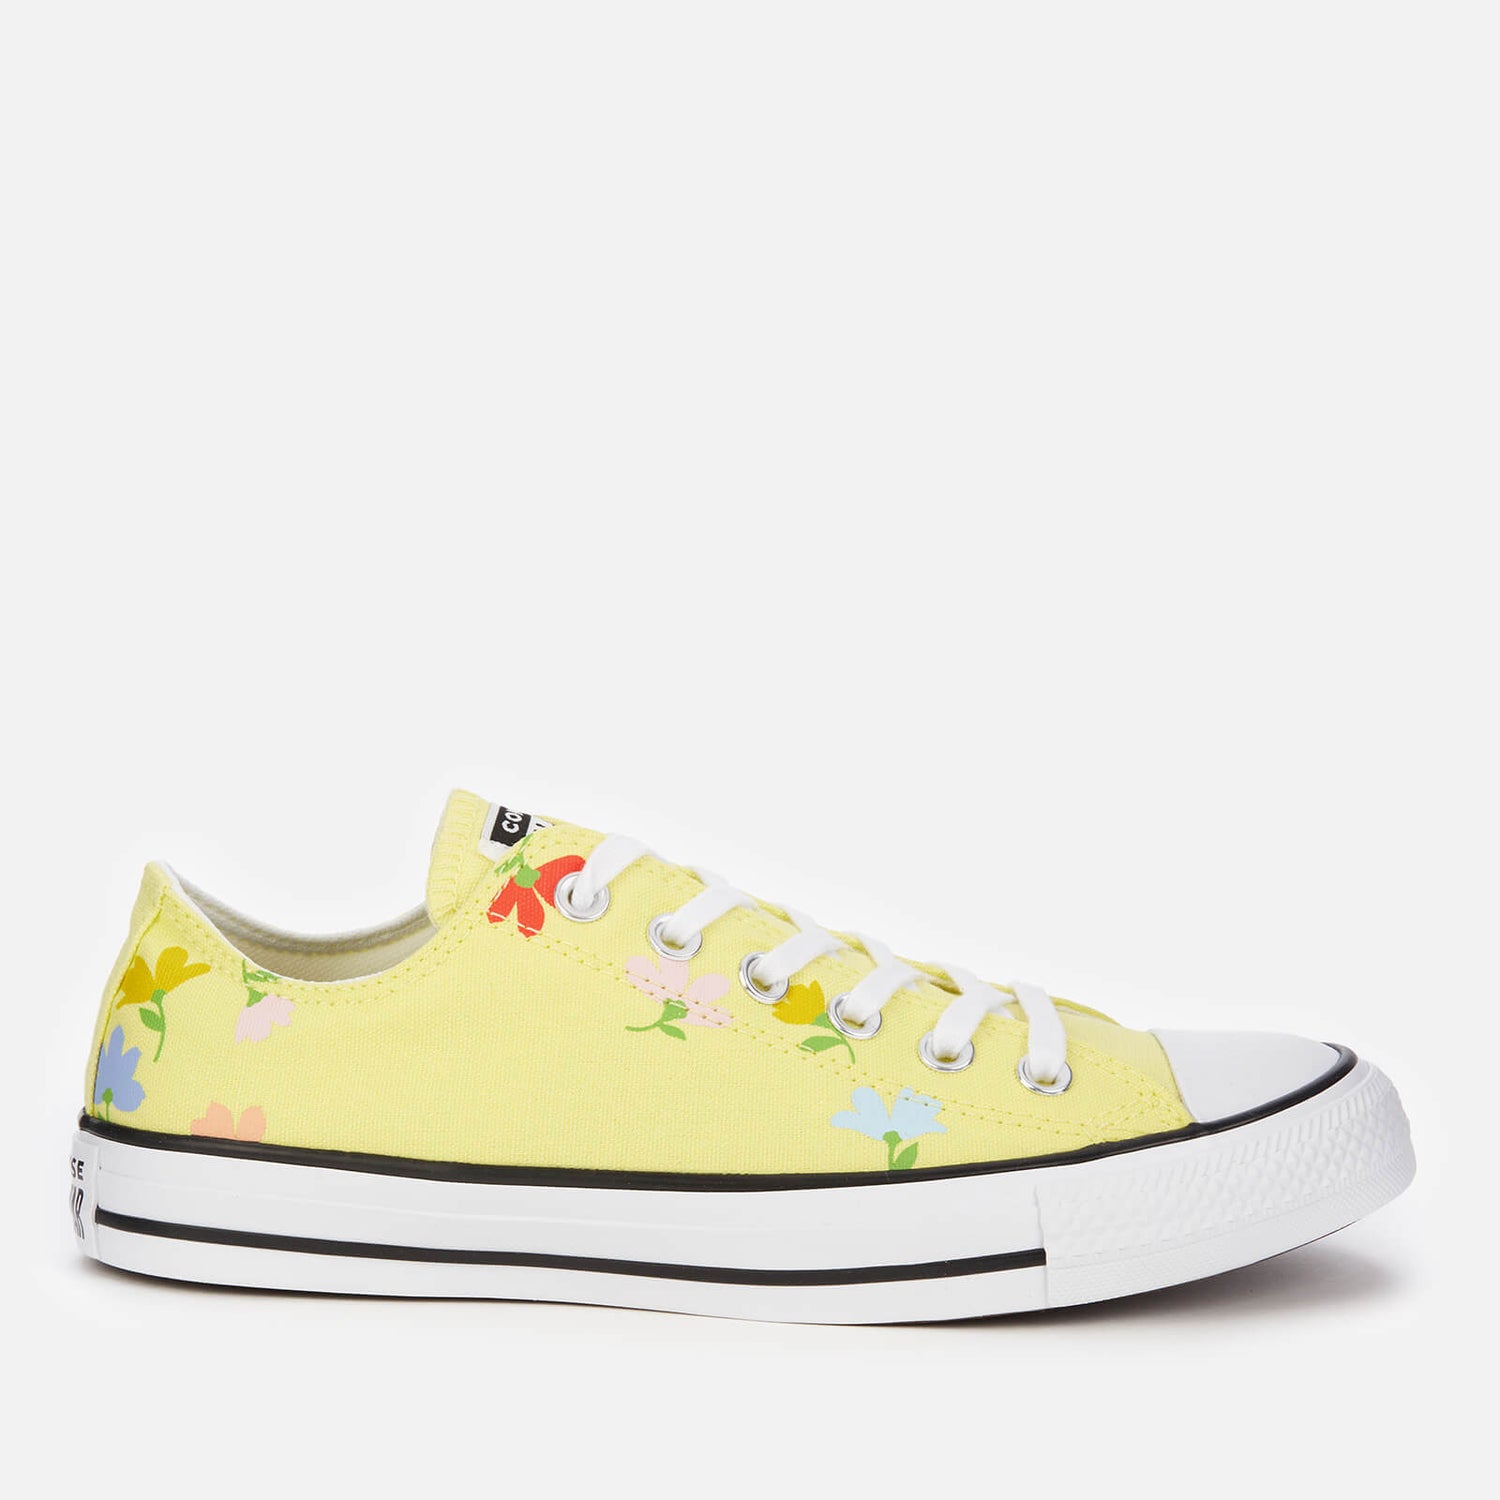 Converse Women's Chuck Taylor All Star Garden Party Print Ox Trainers - Yellow